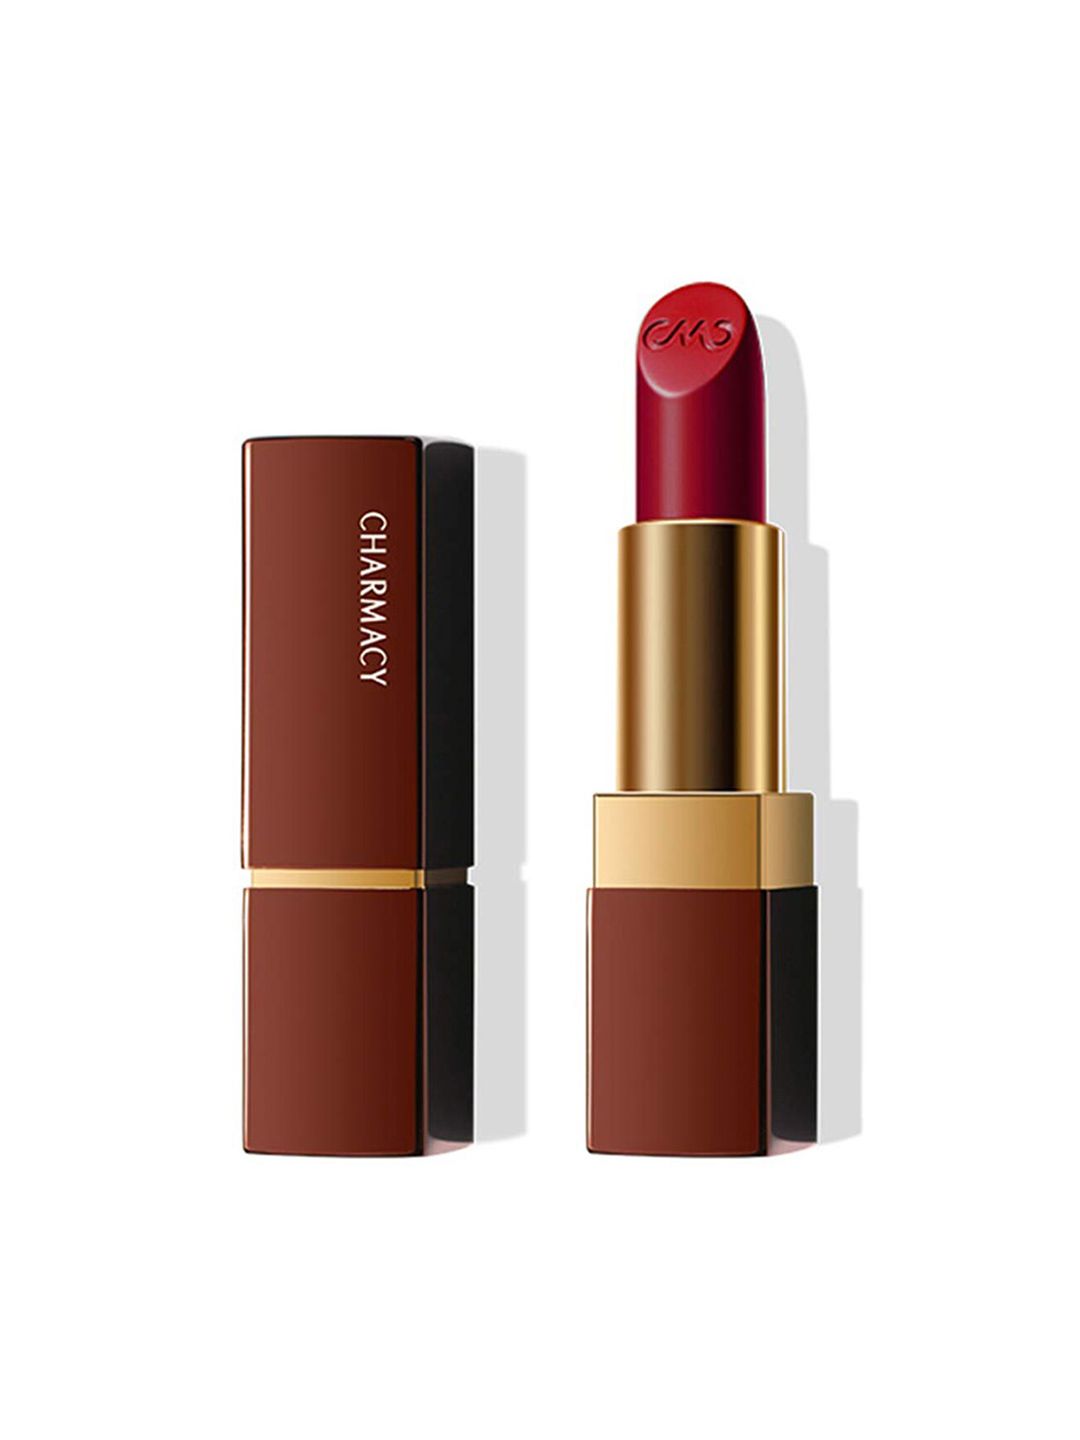 Charmacy Milano Luxe Creme Lipstick - Rich Rose Wood 14 Price in India